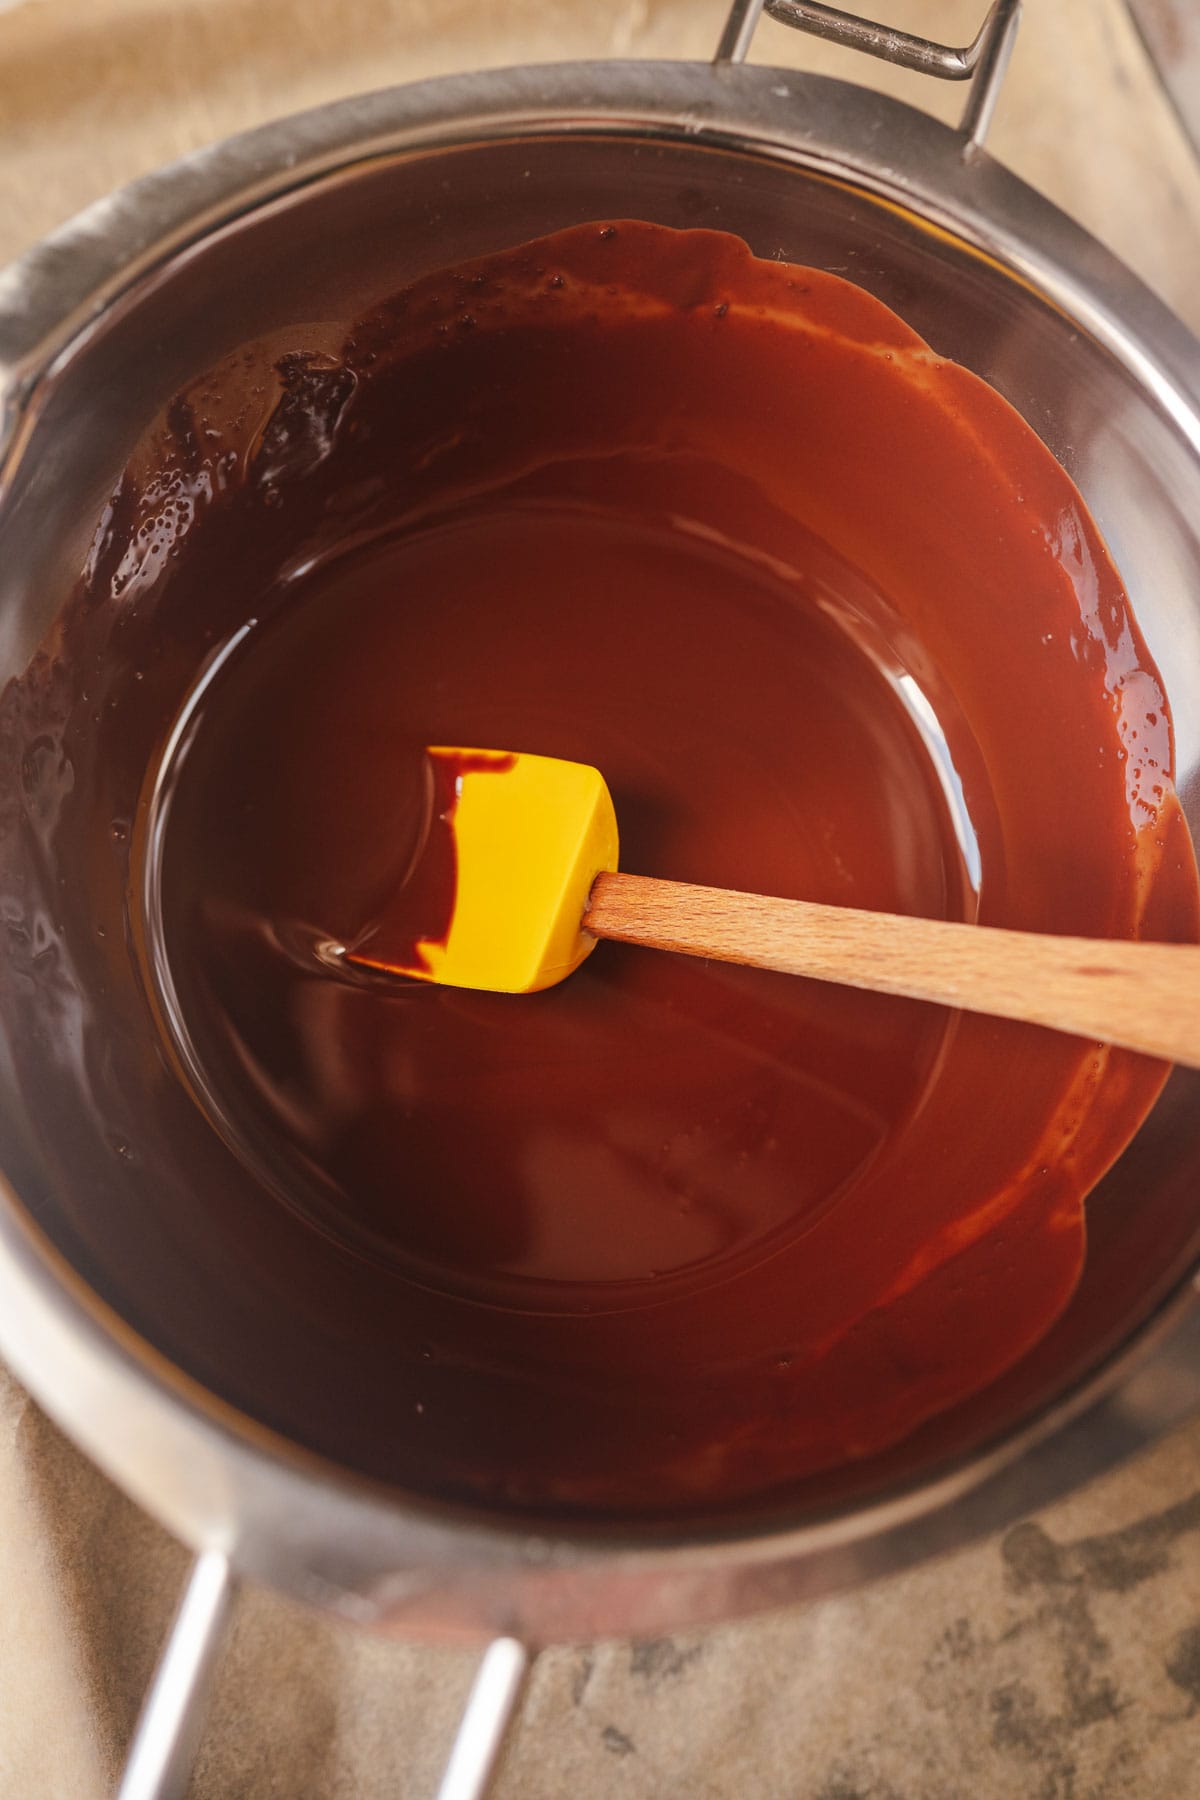 A silver double boiler filled with melted chocolate and a yellow spatula.